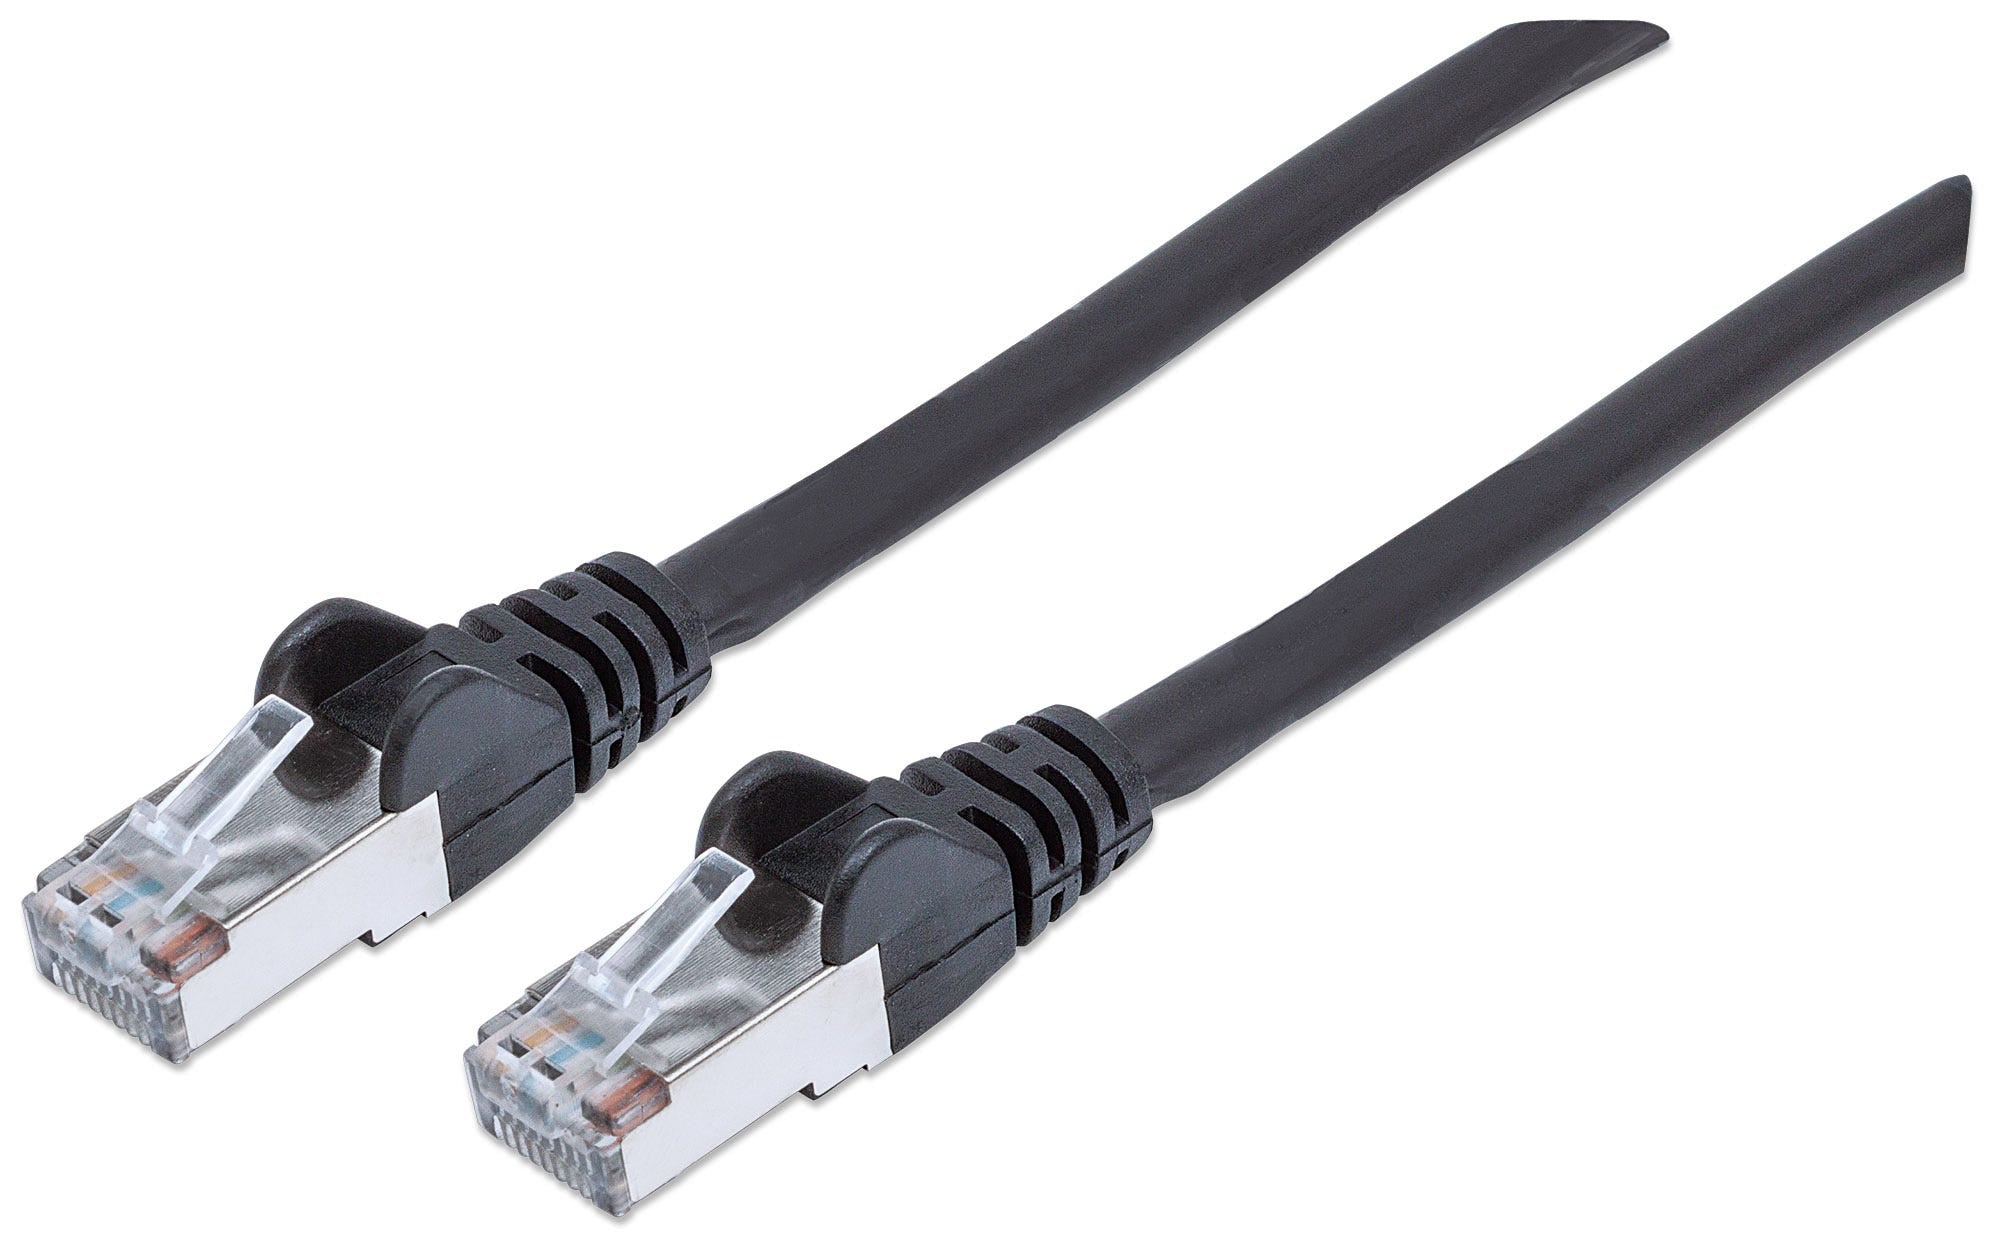 Intellinet Network Patch Cable, Cat6, 1m, Black, Copper, S/FTP, LSOH / LSZH, PVC, RJ45, Gold Plated Contacts, Snagless, Booted, Lifetime Warranty, Polybag